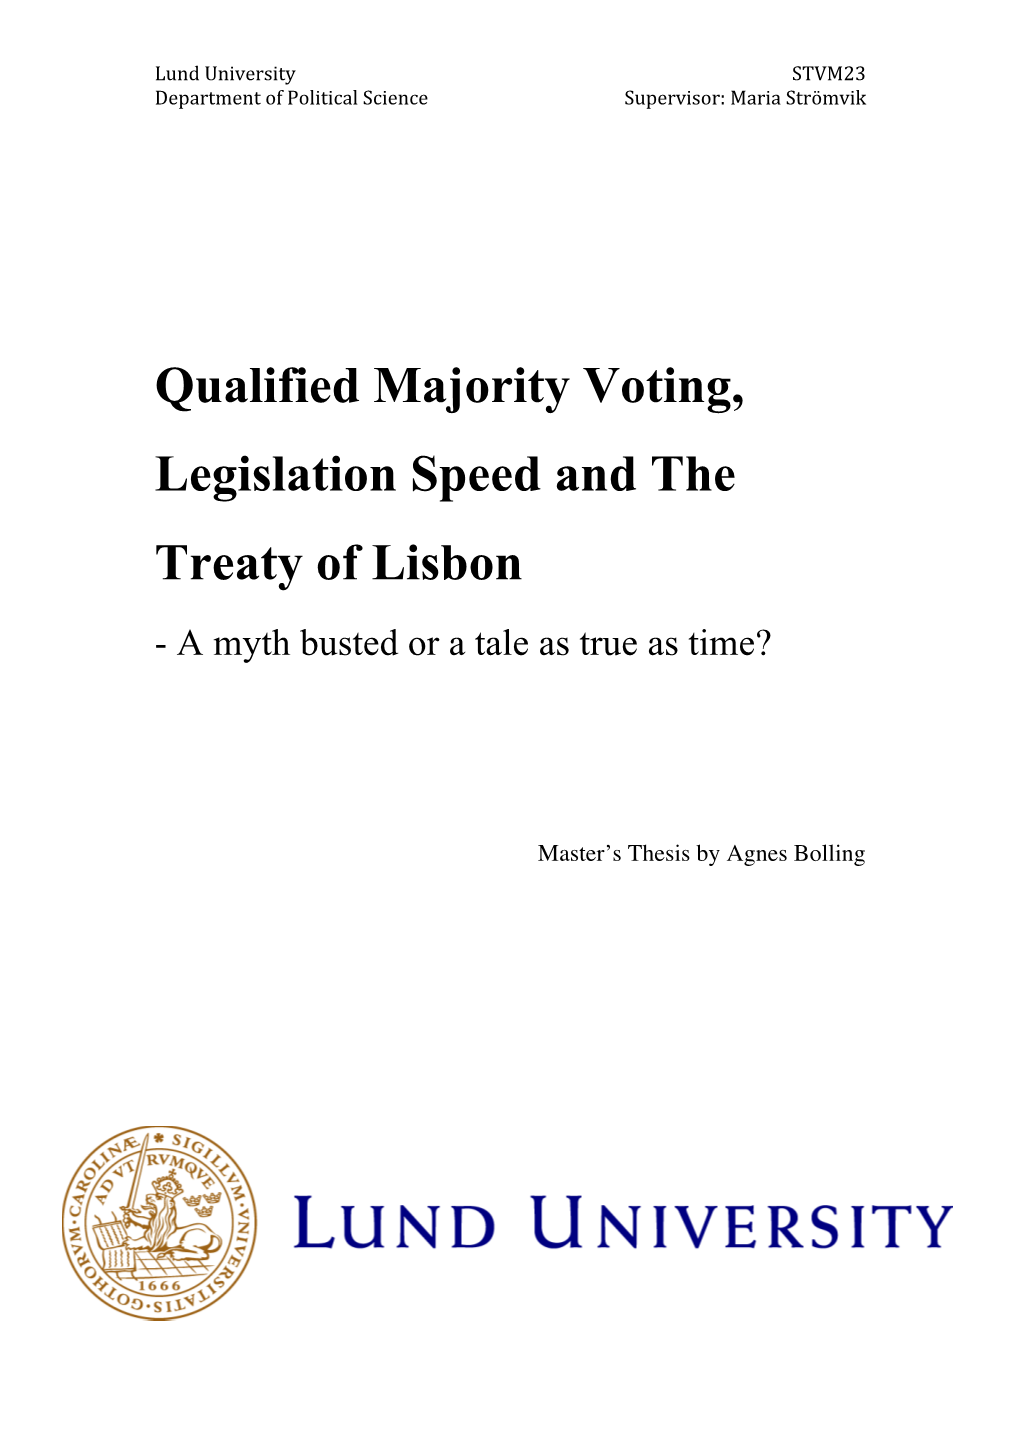 Qualified Majority Voting, Legislation Speed and the Treaty of Lisbon - a Myth Busted Or a Tale As True As Time?